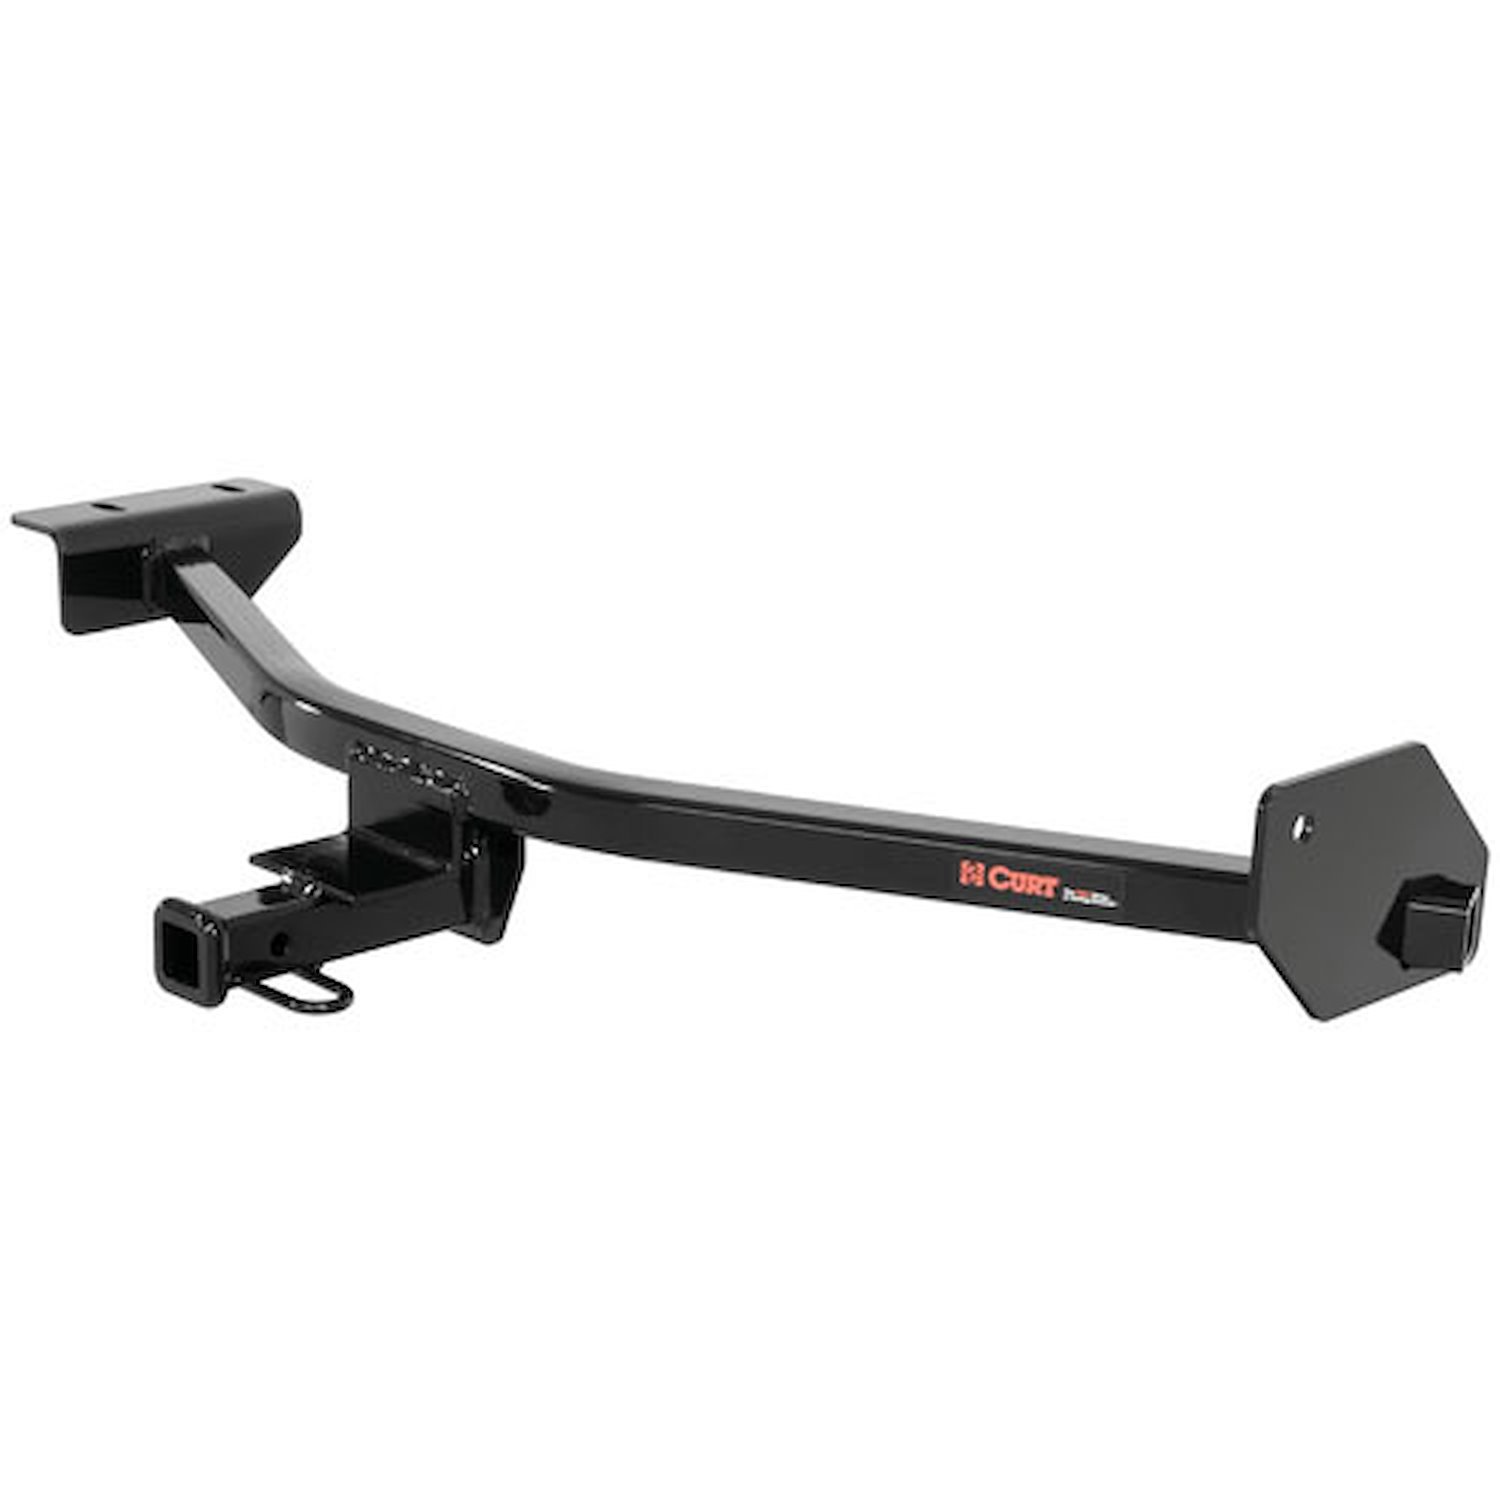 Class I Receiver Hitch 2011-15 for Nissan Leaf